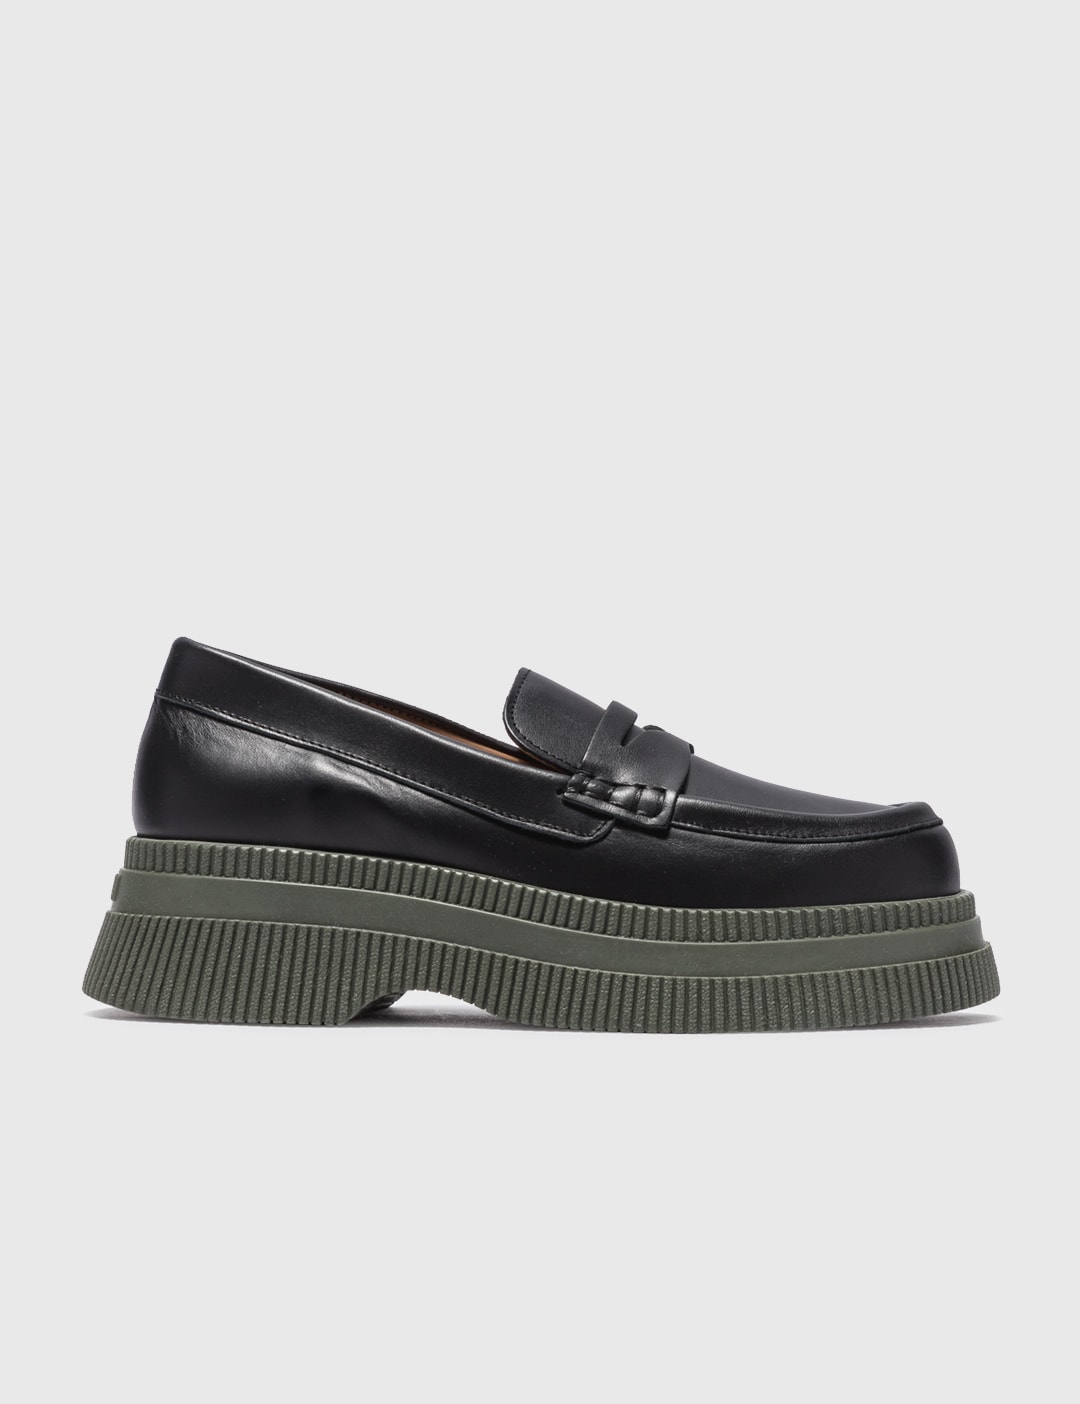 CREEPERS WALLABY LOAFERS Placeholder Image